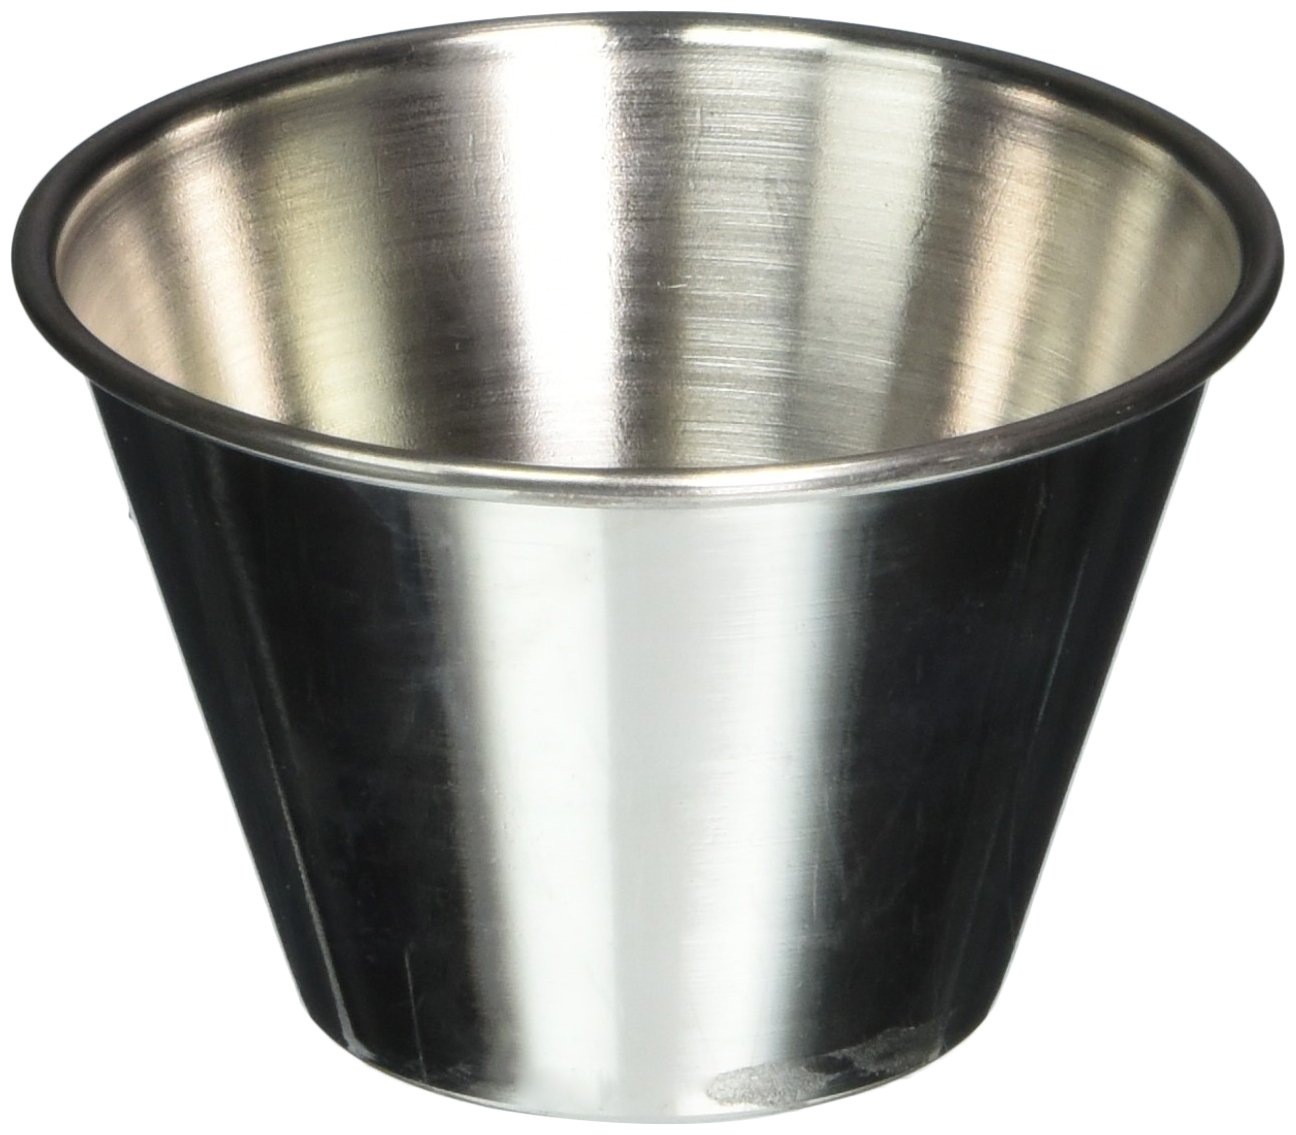 American Metalcraft Stainless Steel Sauce Cup, 4 Ounce – 1 Each.